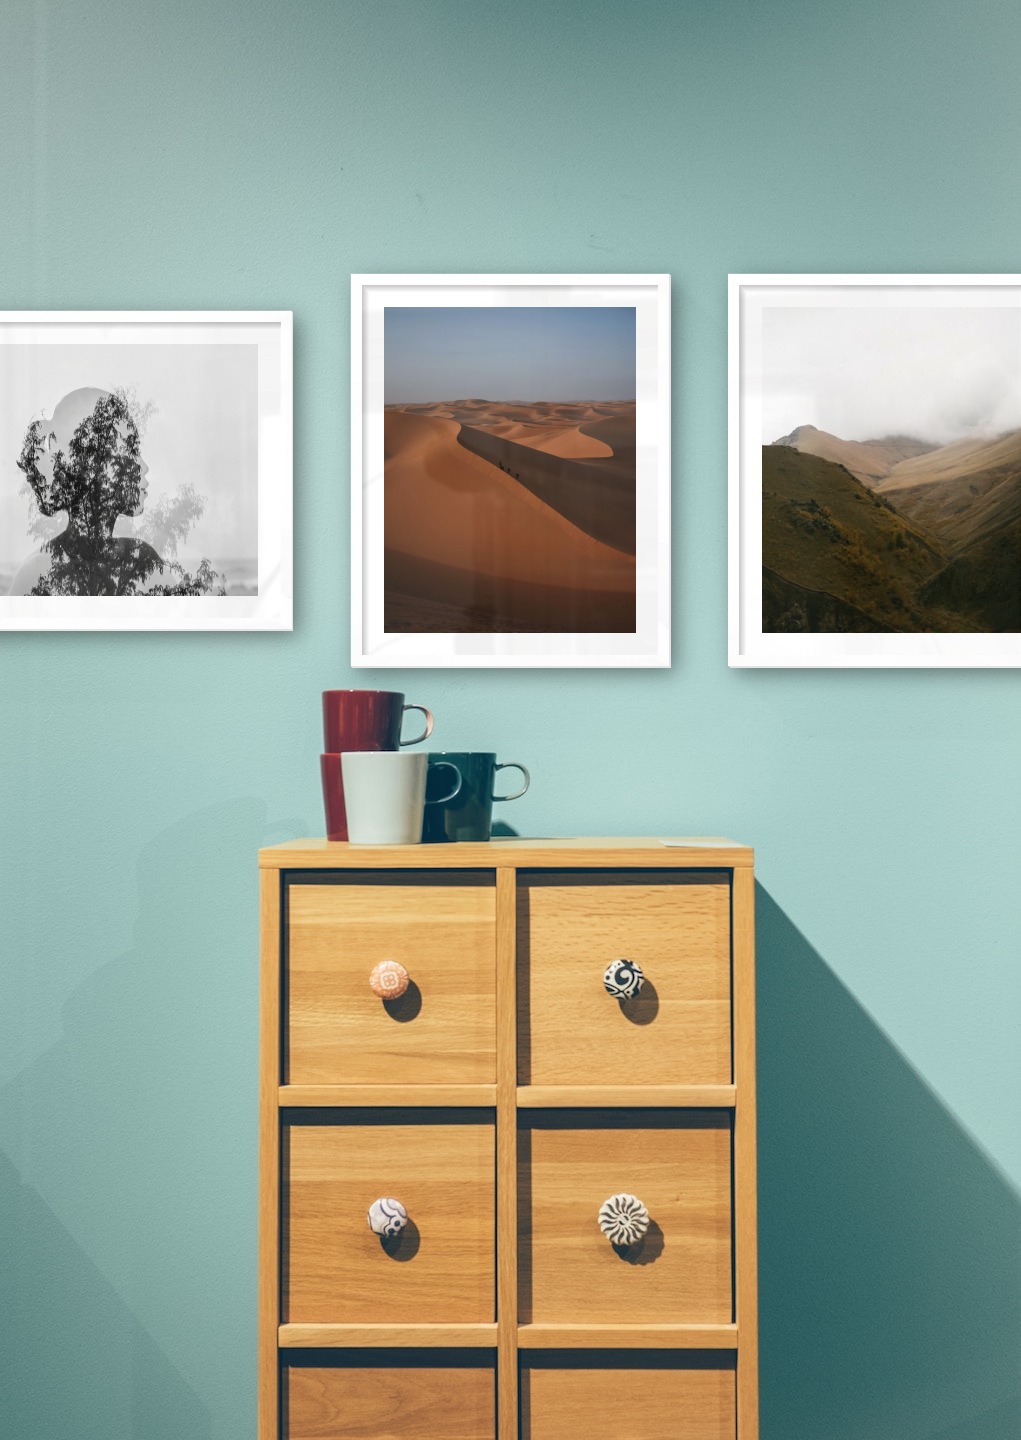 Gallery wall with picture frames in white in sizes 40x50 and 50x50 with prints "Trees and silhouette", "Desert" and "Foggy valley"